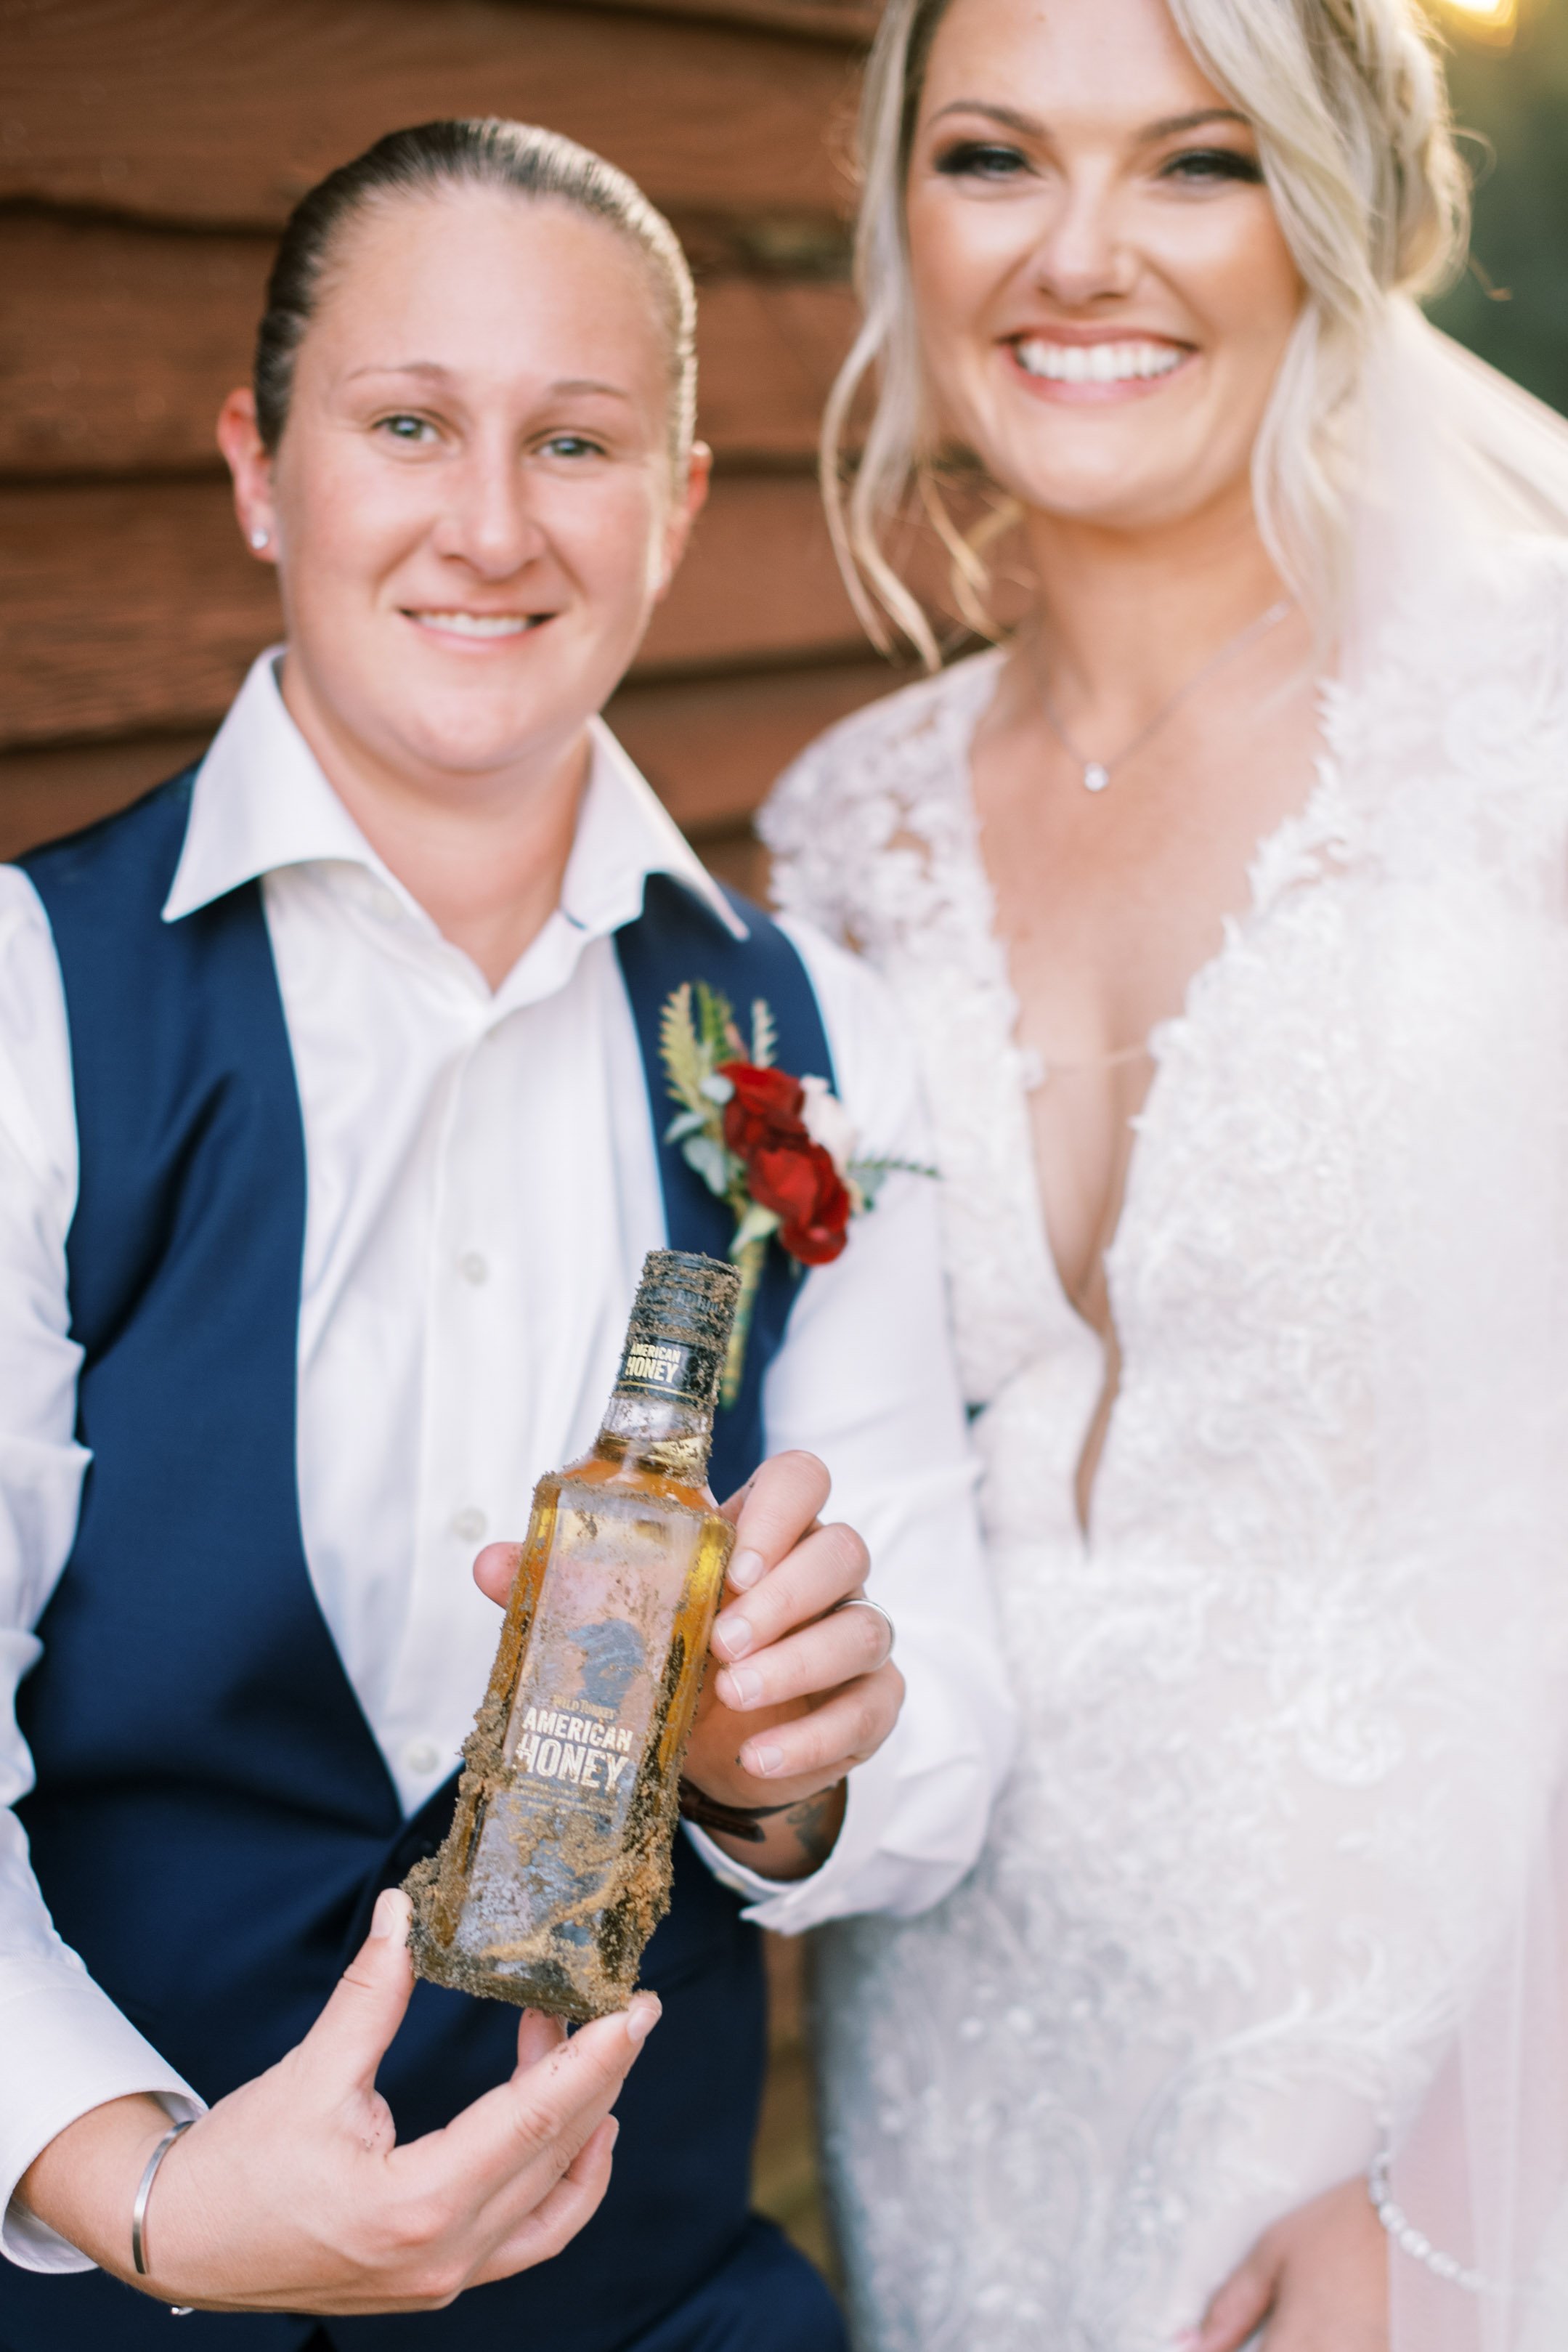 Bourbon Bottle Southern Wedding Tradition Walnut Hill NC Wedding Venue Fancy This Photography